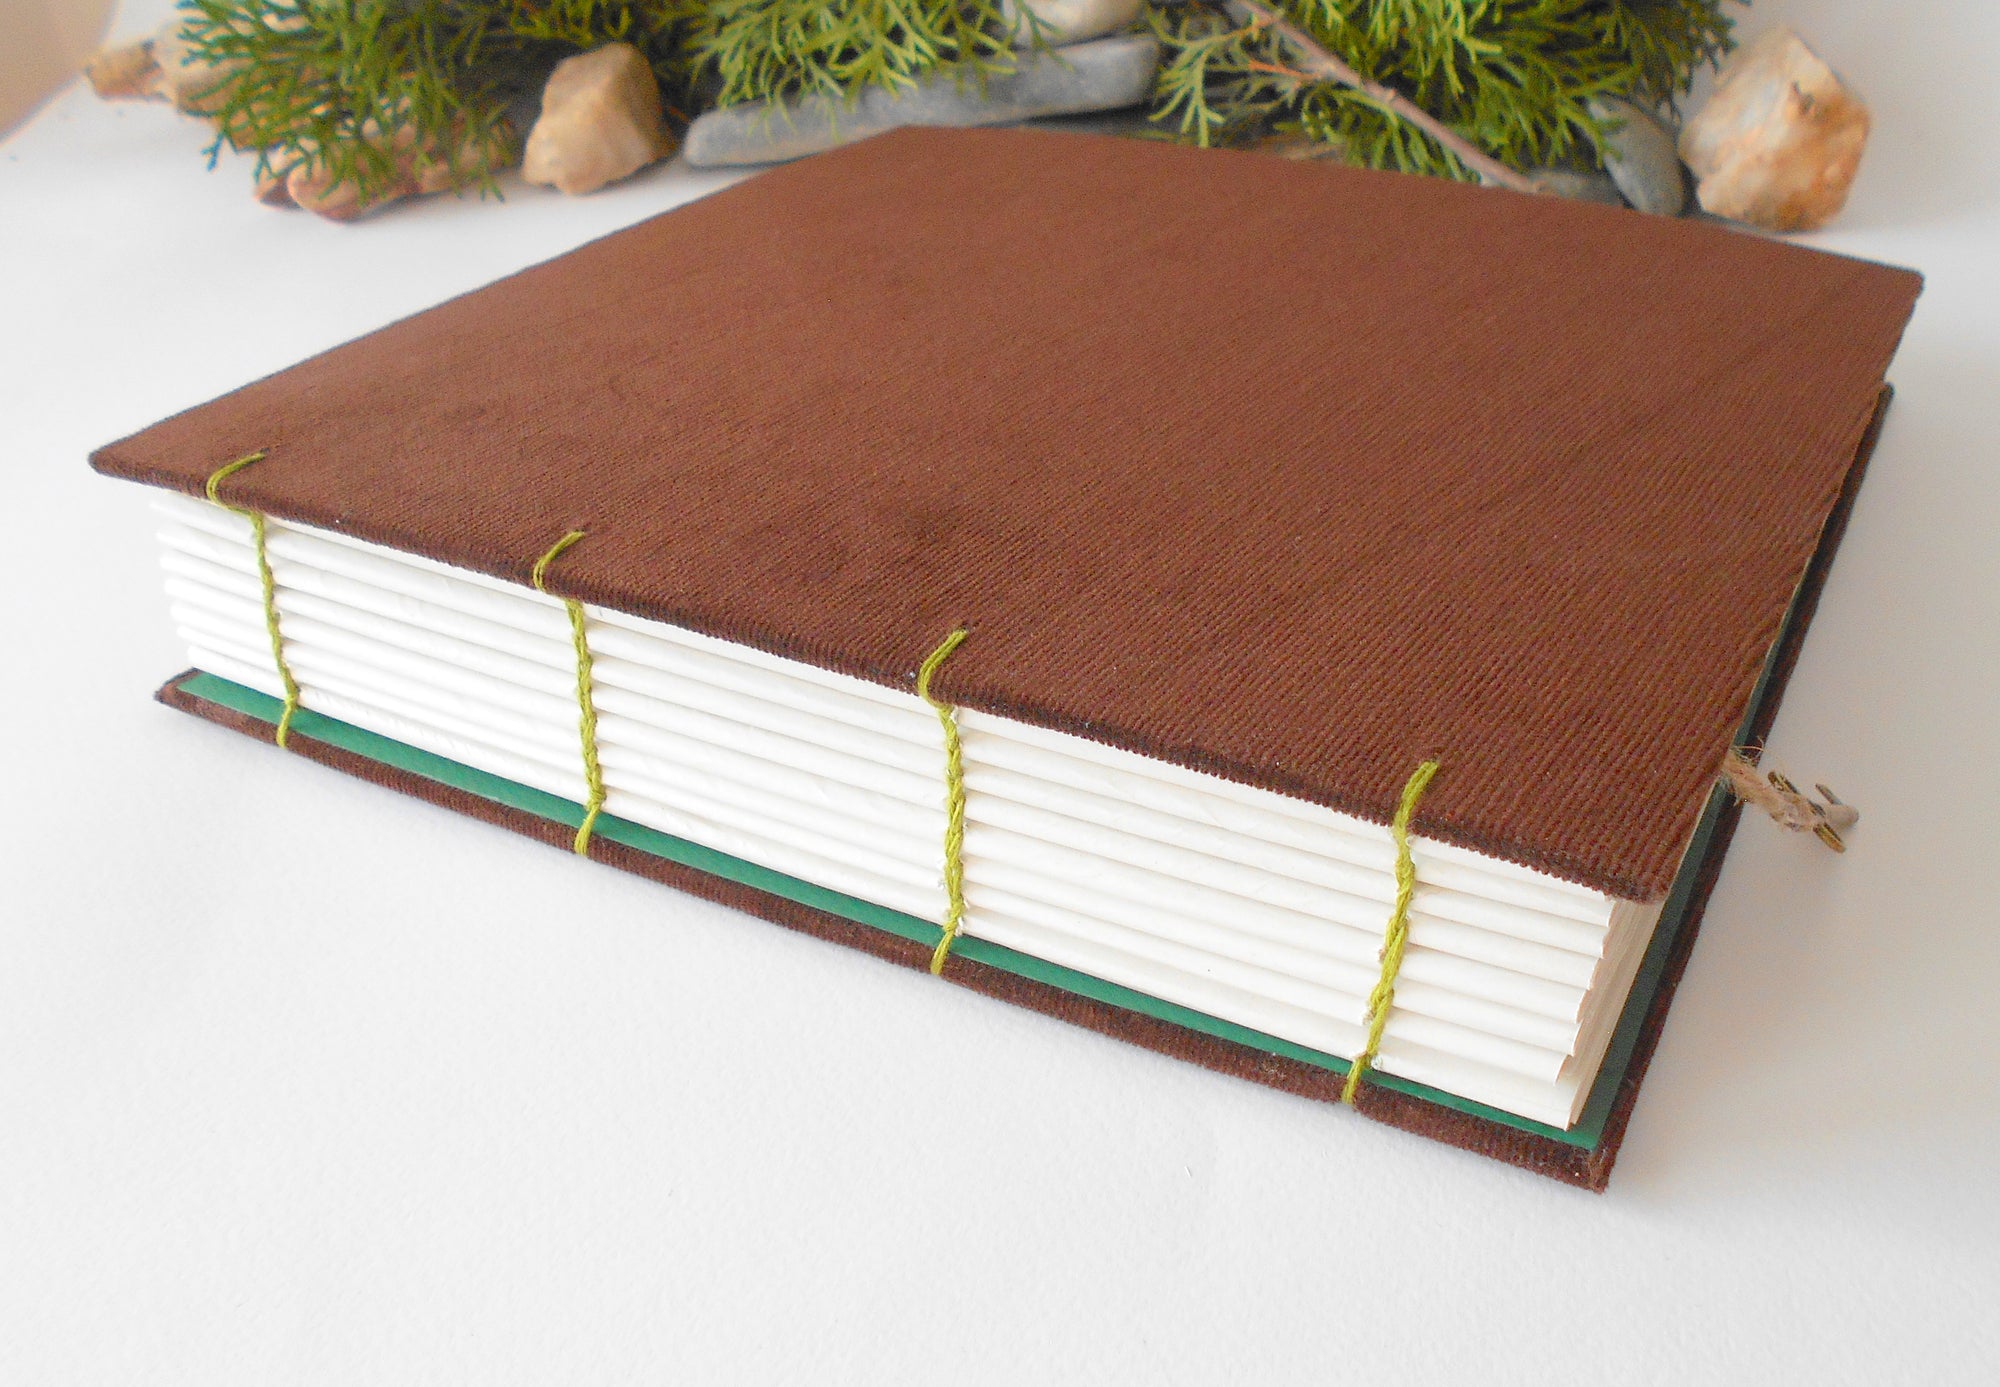 Brown coptic bound fabric journal- 100% recycled pages- gift for writers, artist and teachers- green thread bindinb but you can chooe from 23 colors to personalize a different color for your binding